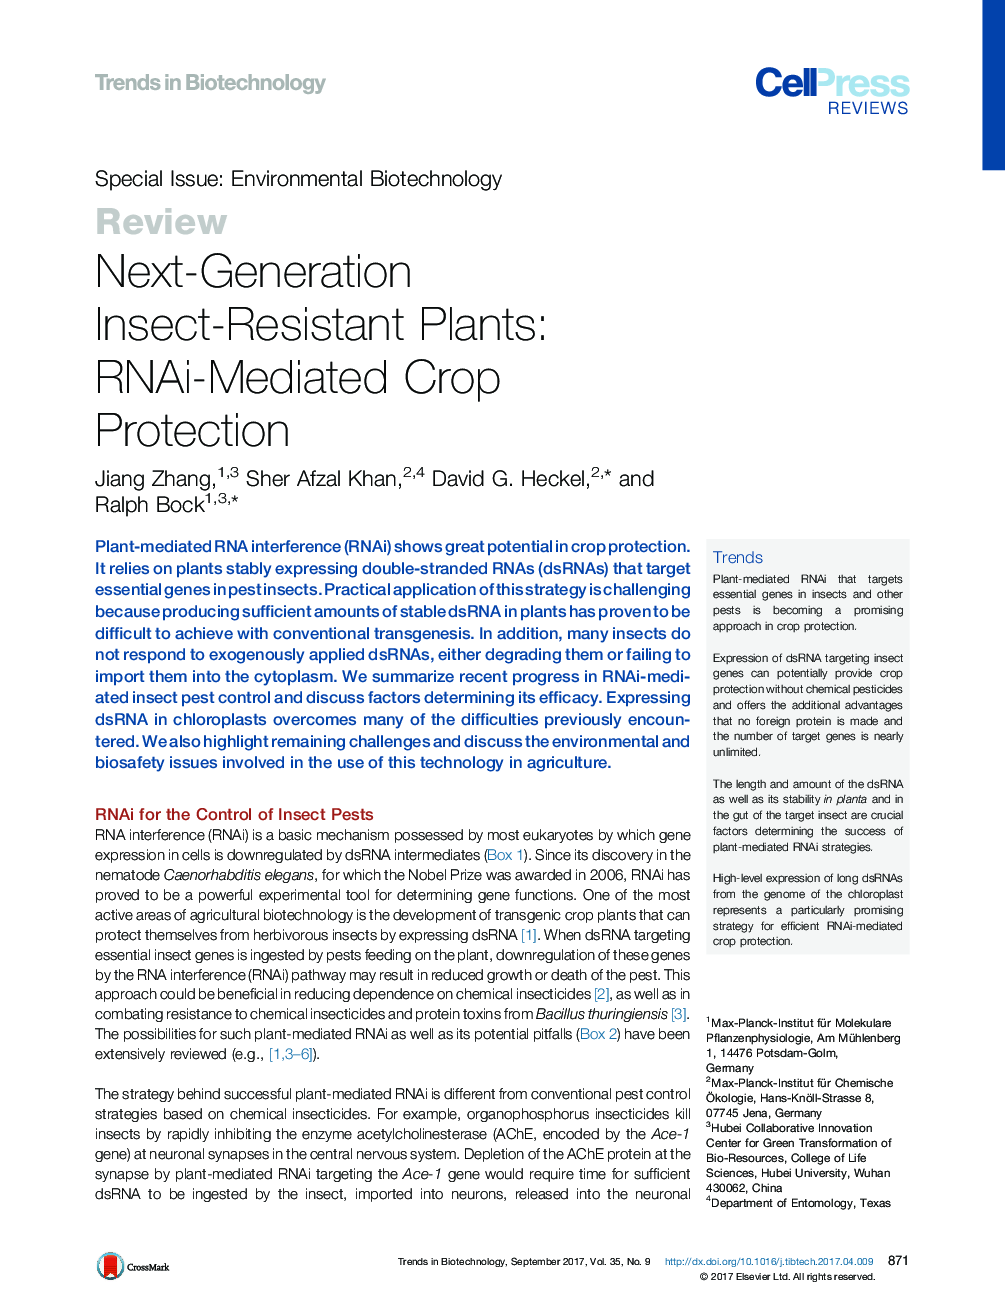 Next-Generation Insect-Resistant Plants: RNAi-Mediated Crop Protection